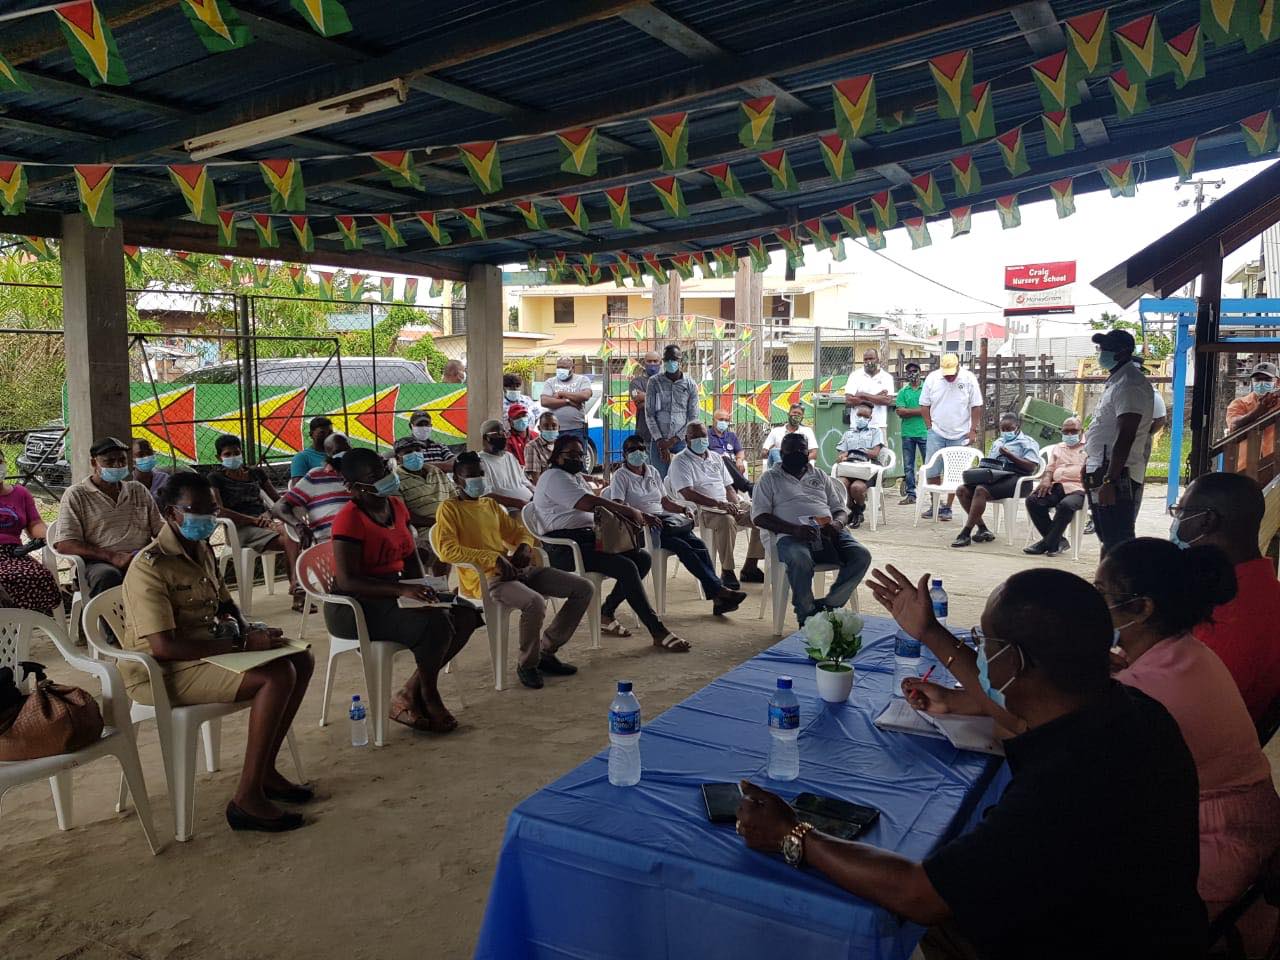 Deputy Commissioner (ag), Clifton Hicken, at the head table with other senior officers at the Caledonia/Good Success NDC during the meeting with residents